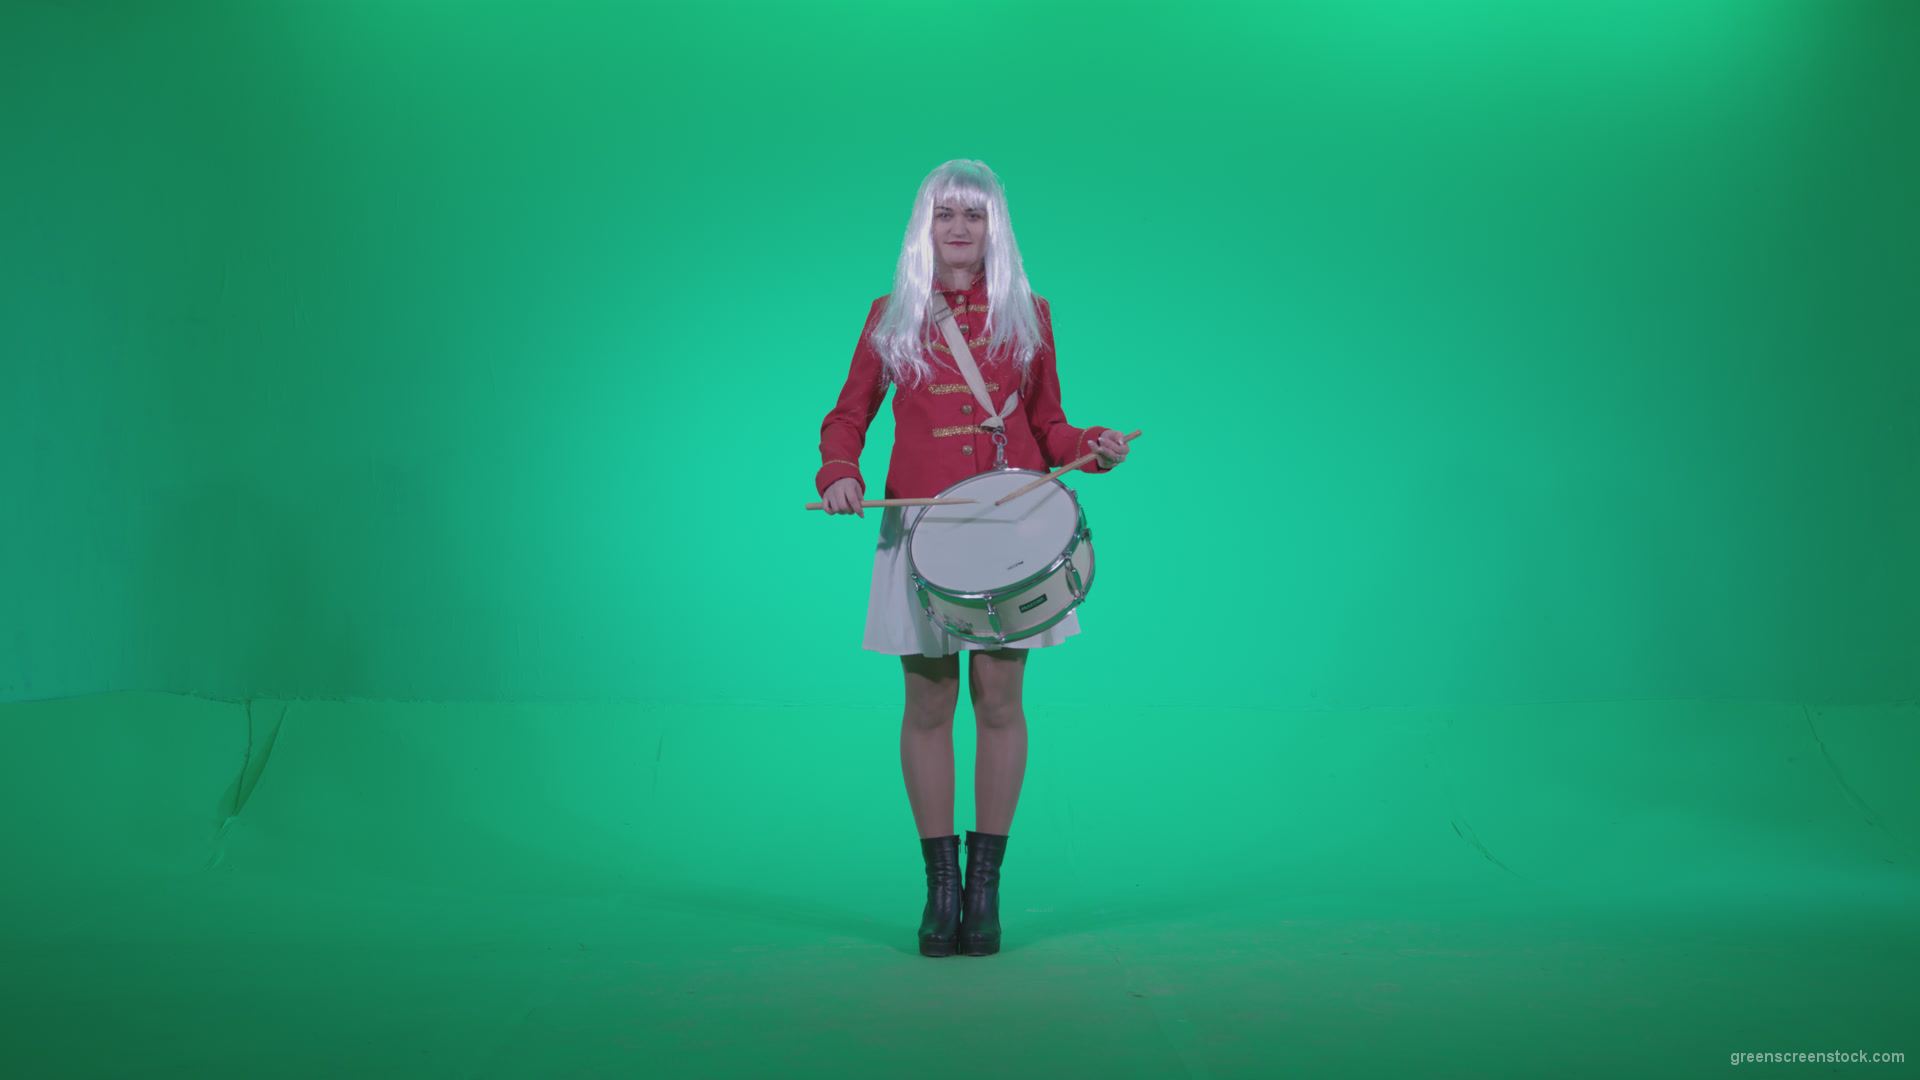 Snare-Drumming-girl-with-white-haire-z1_001 Green Screen Stock